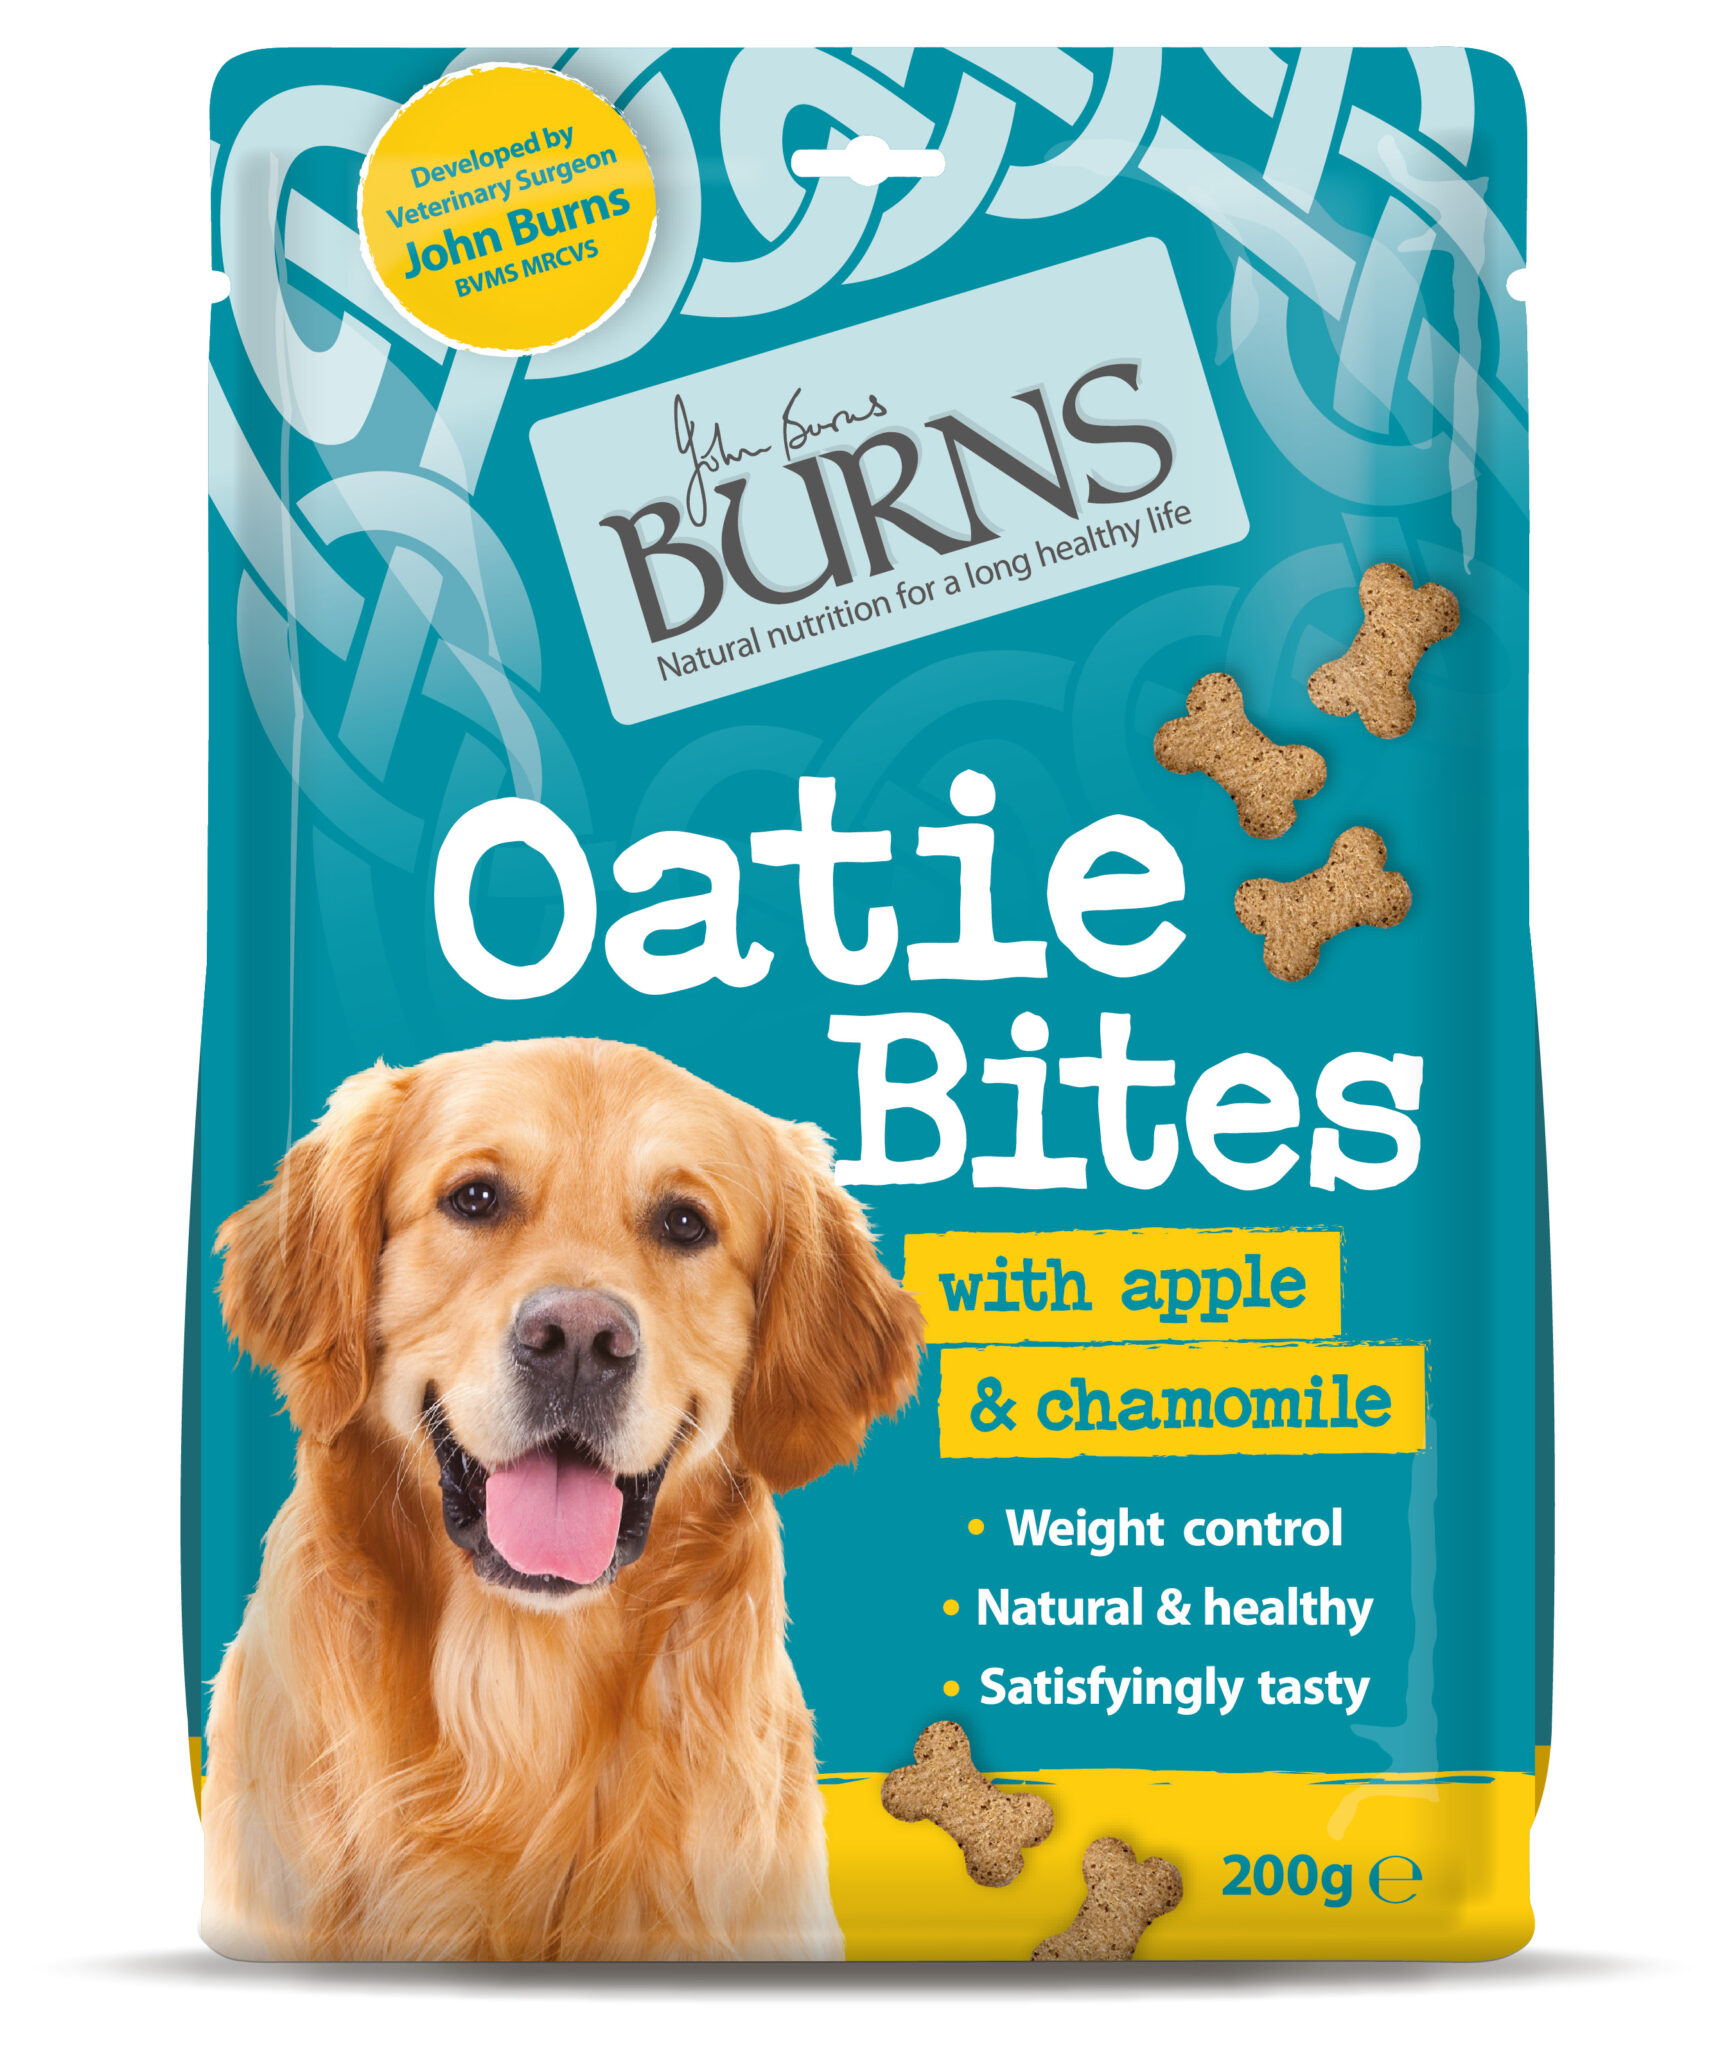 Suppliers of Oatie Bites With Apple & Chamomile